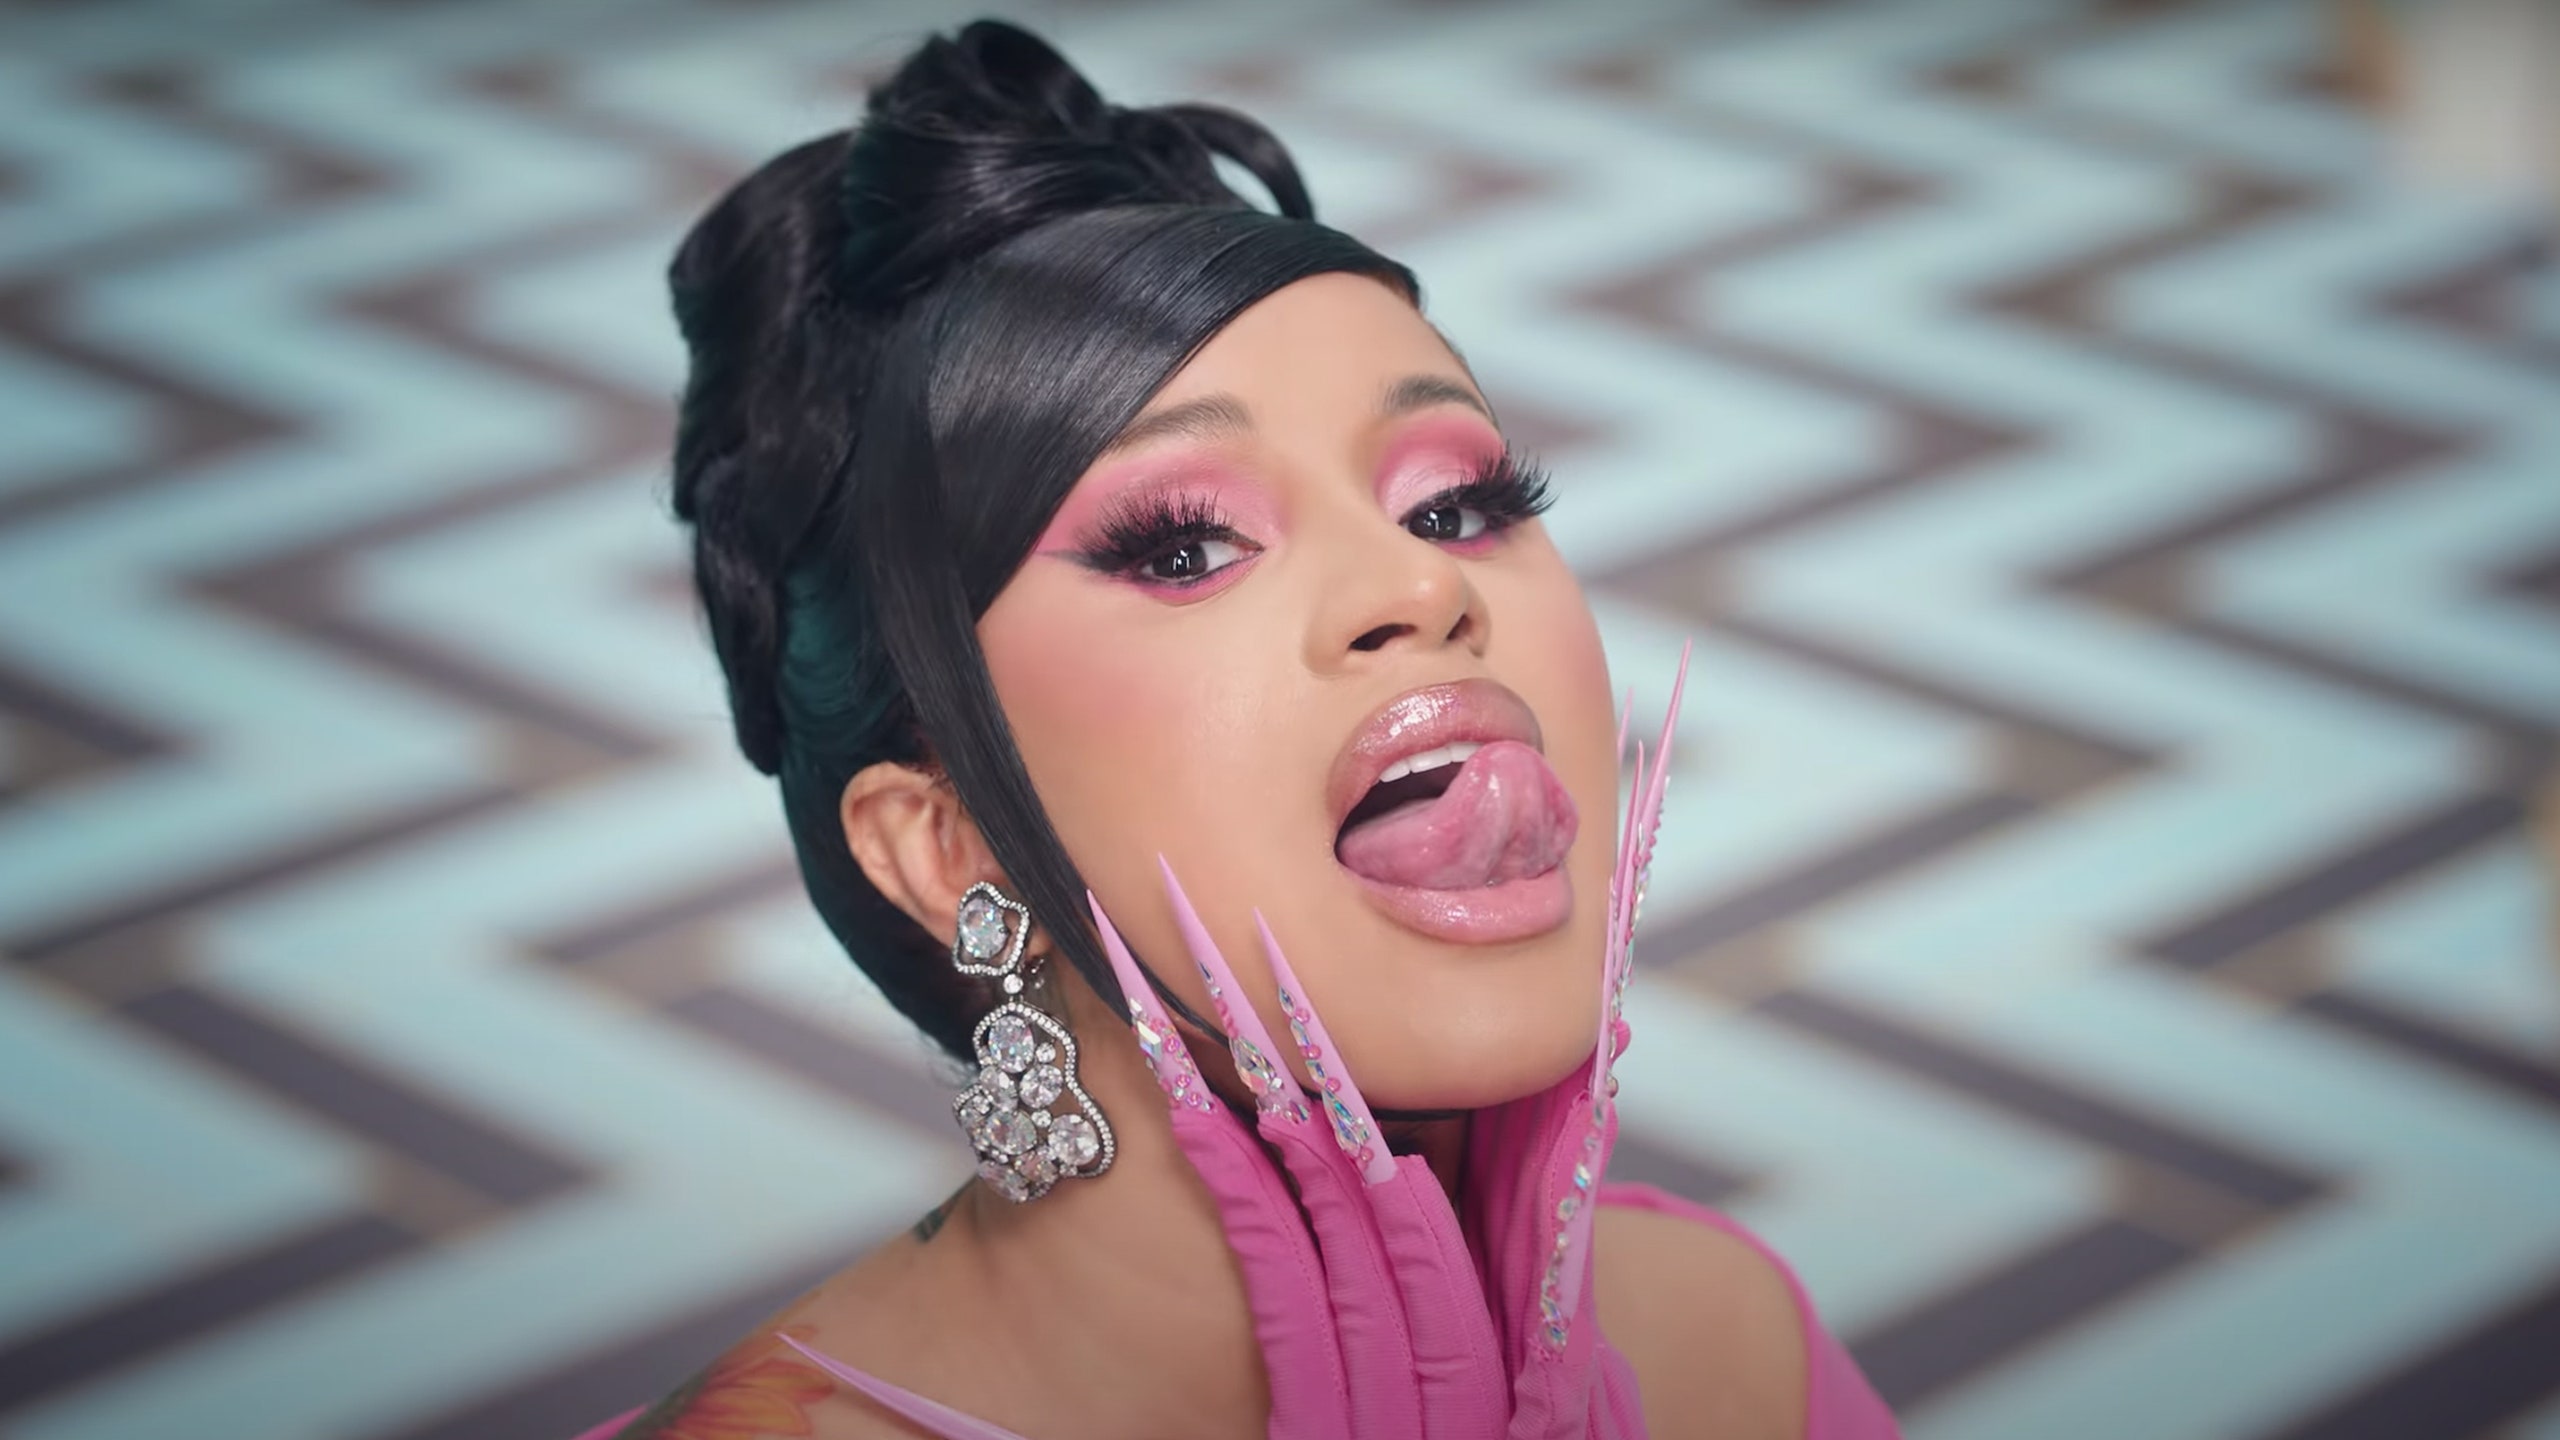 Cardi b just launched an OnlyFans Account.